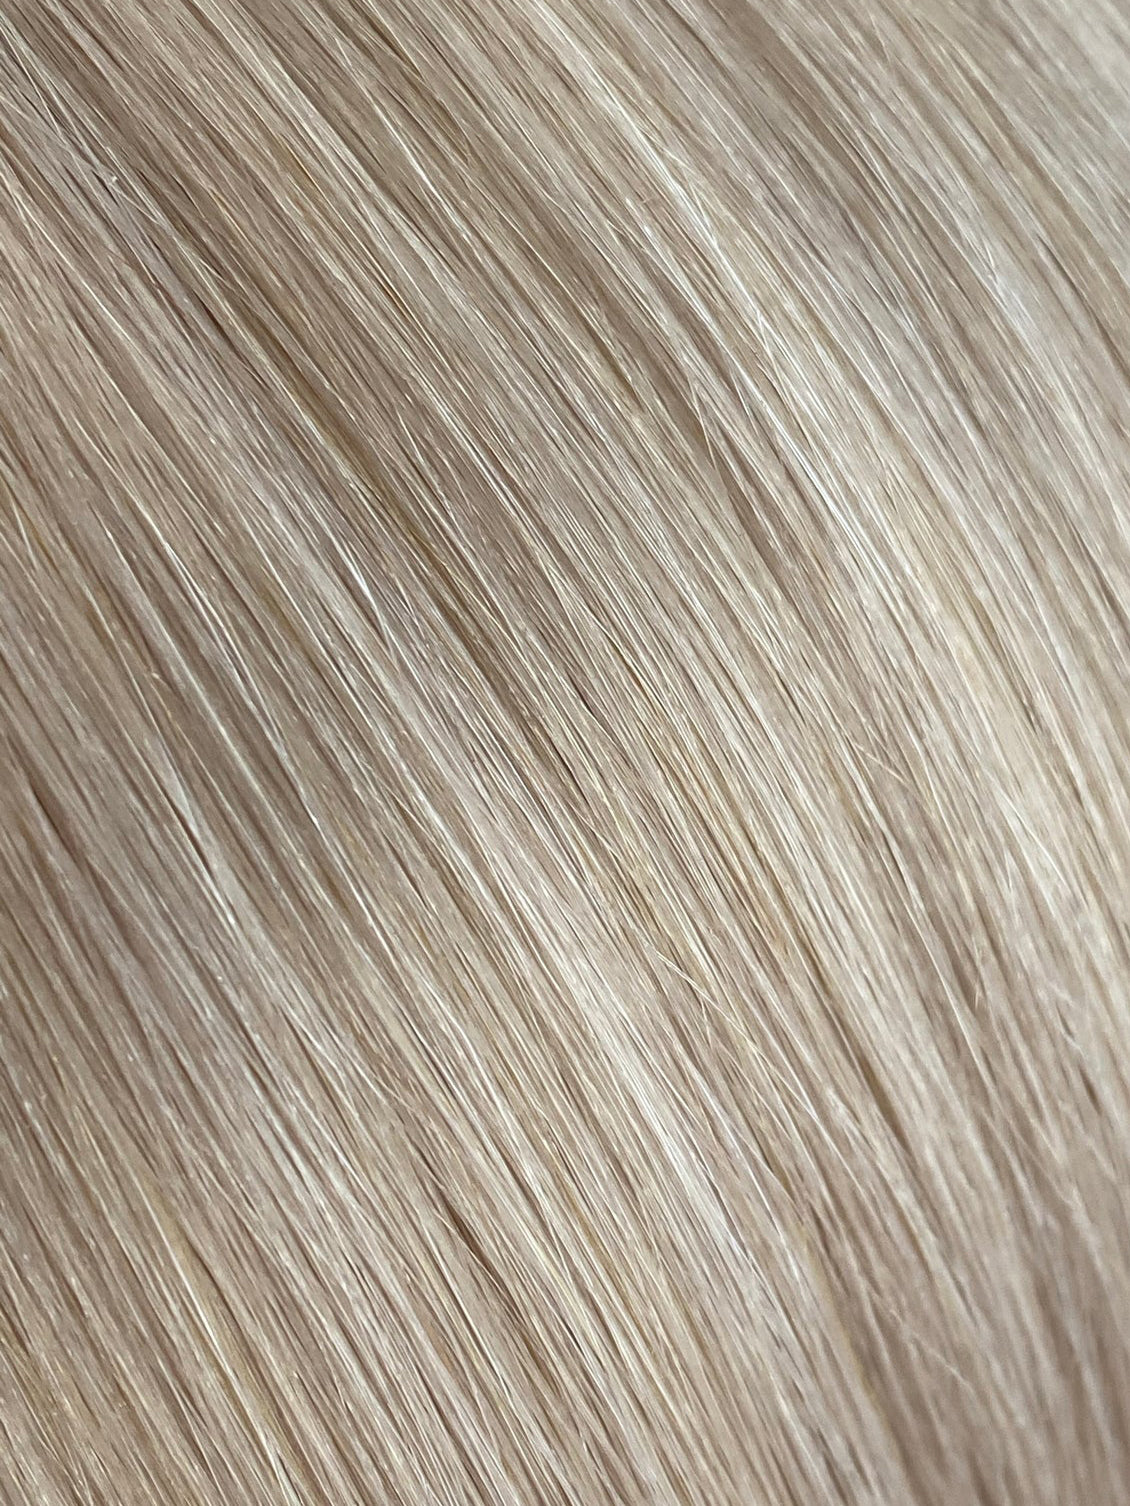 OCCASSIONAL CLIP INS-60a Ash Blonde 20 INCH